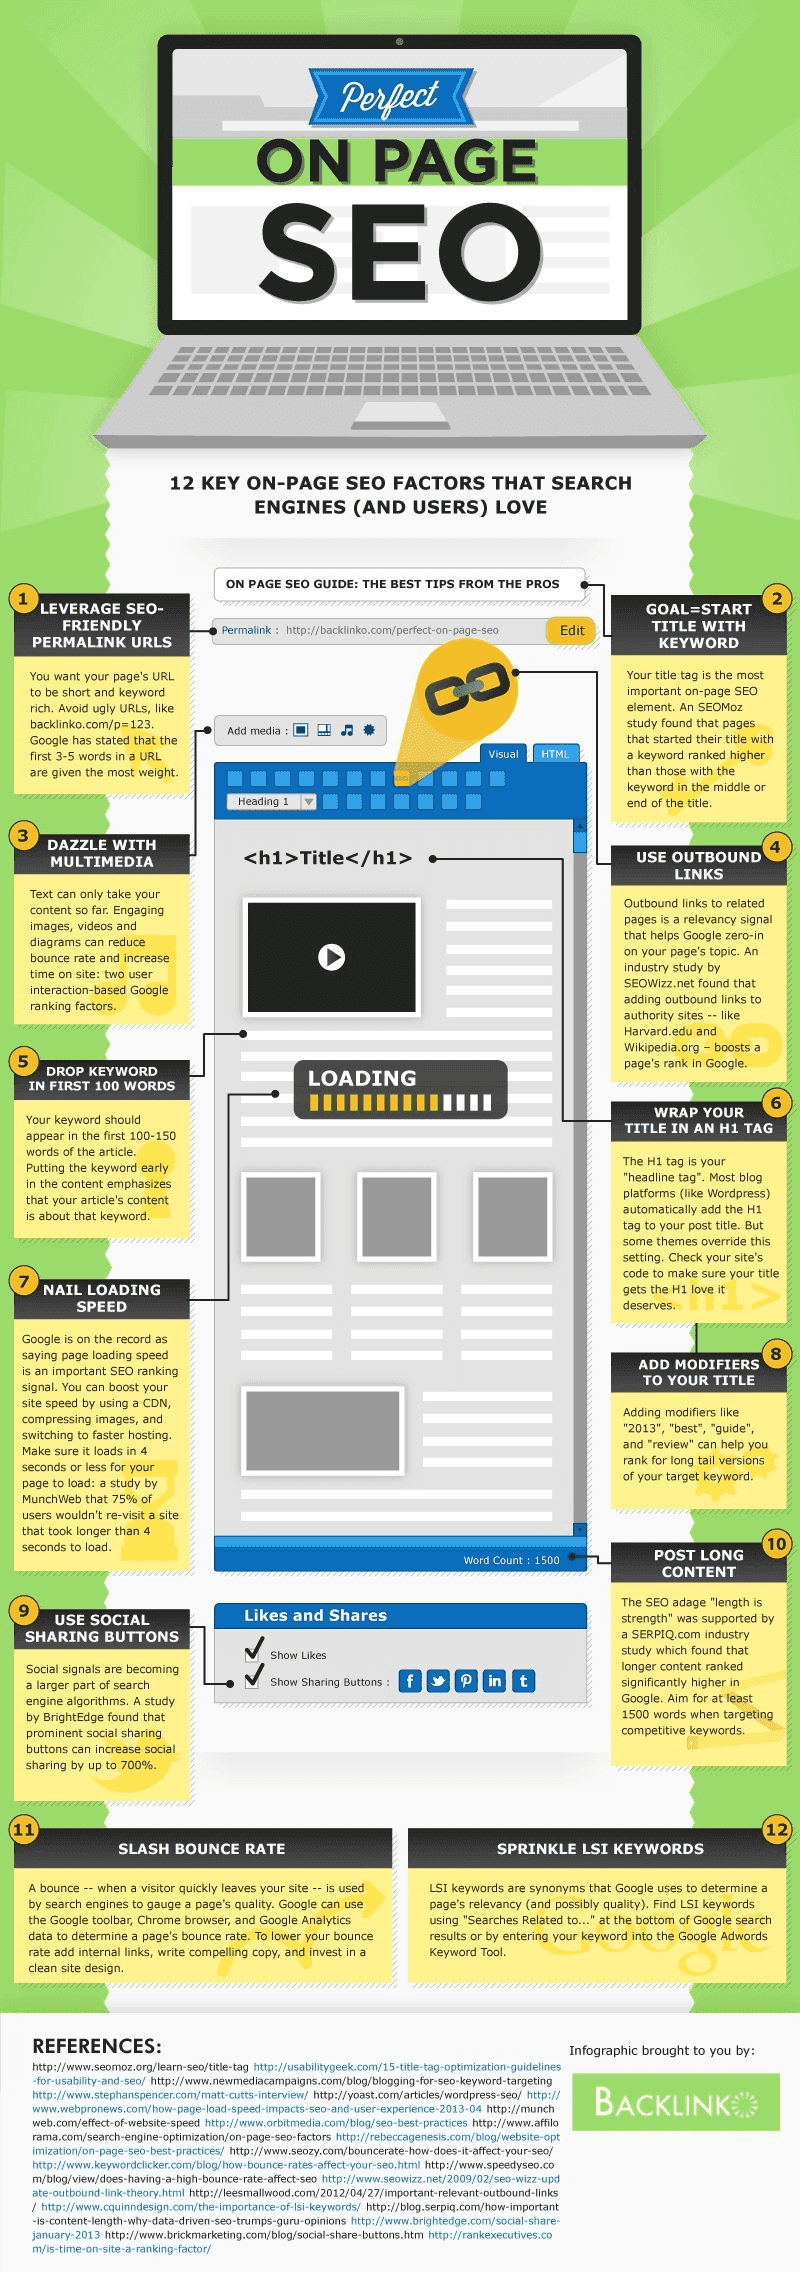 Large infographic for on-page SEO